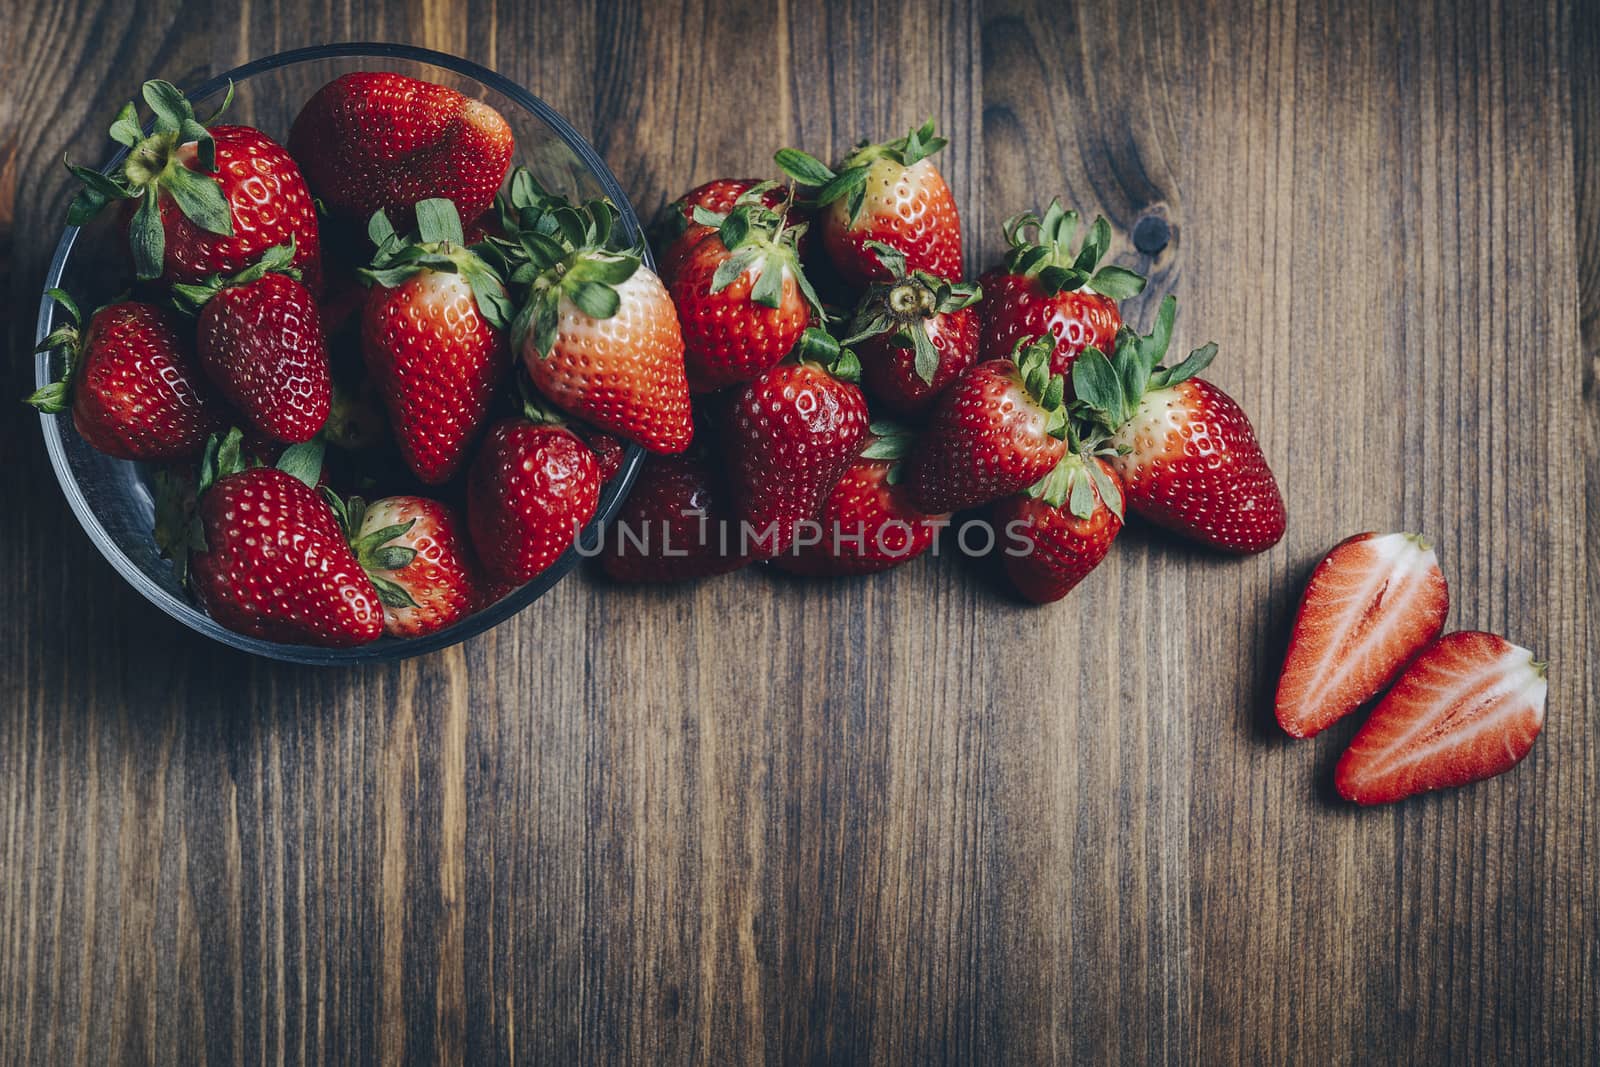 Fresh and juicy strawberries in a glass bowl on wooden table in rustic style, healthy sweet food, vitamins and fruity concept. Top view, copy space for text